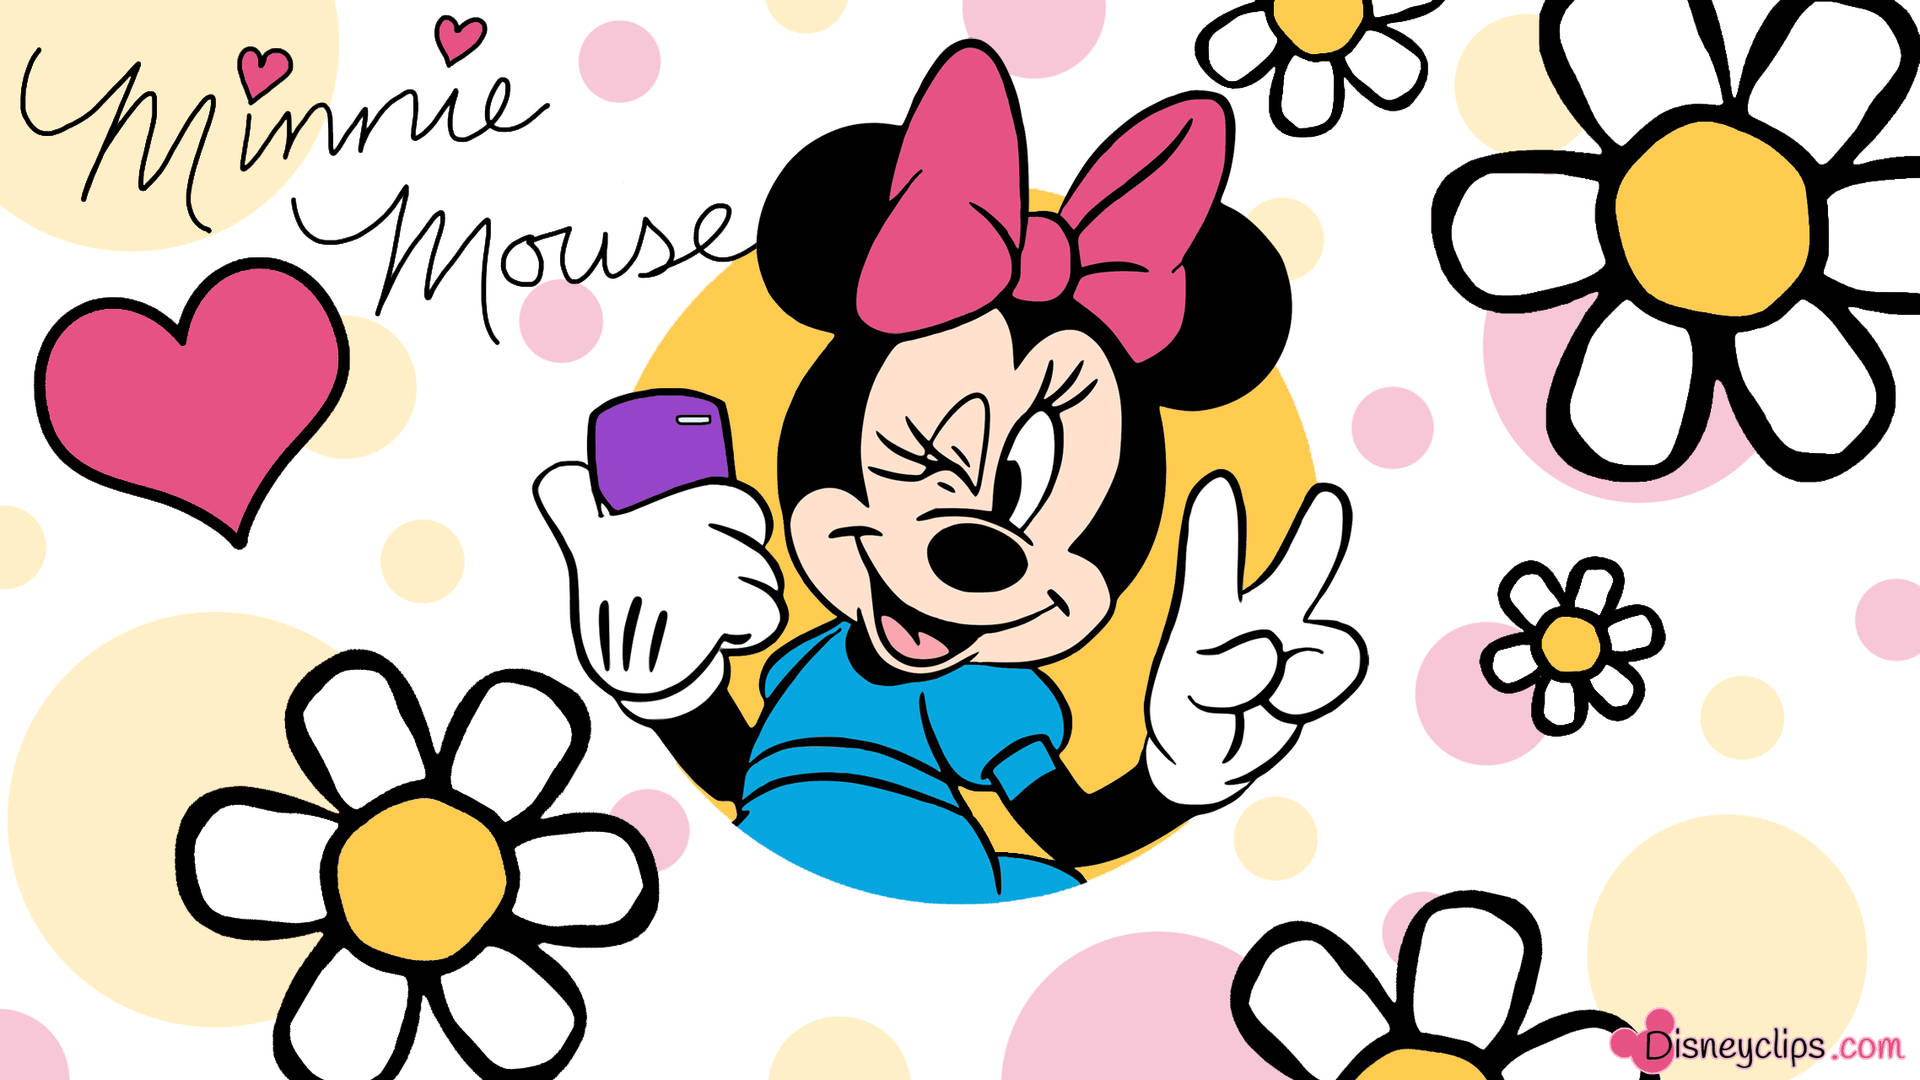 Minnie Mouse Posing For Selfie Background